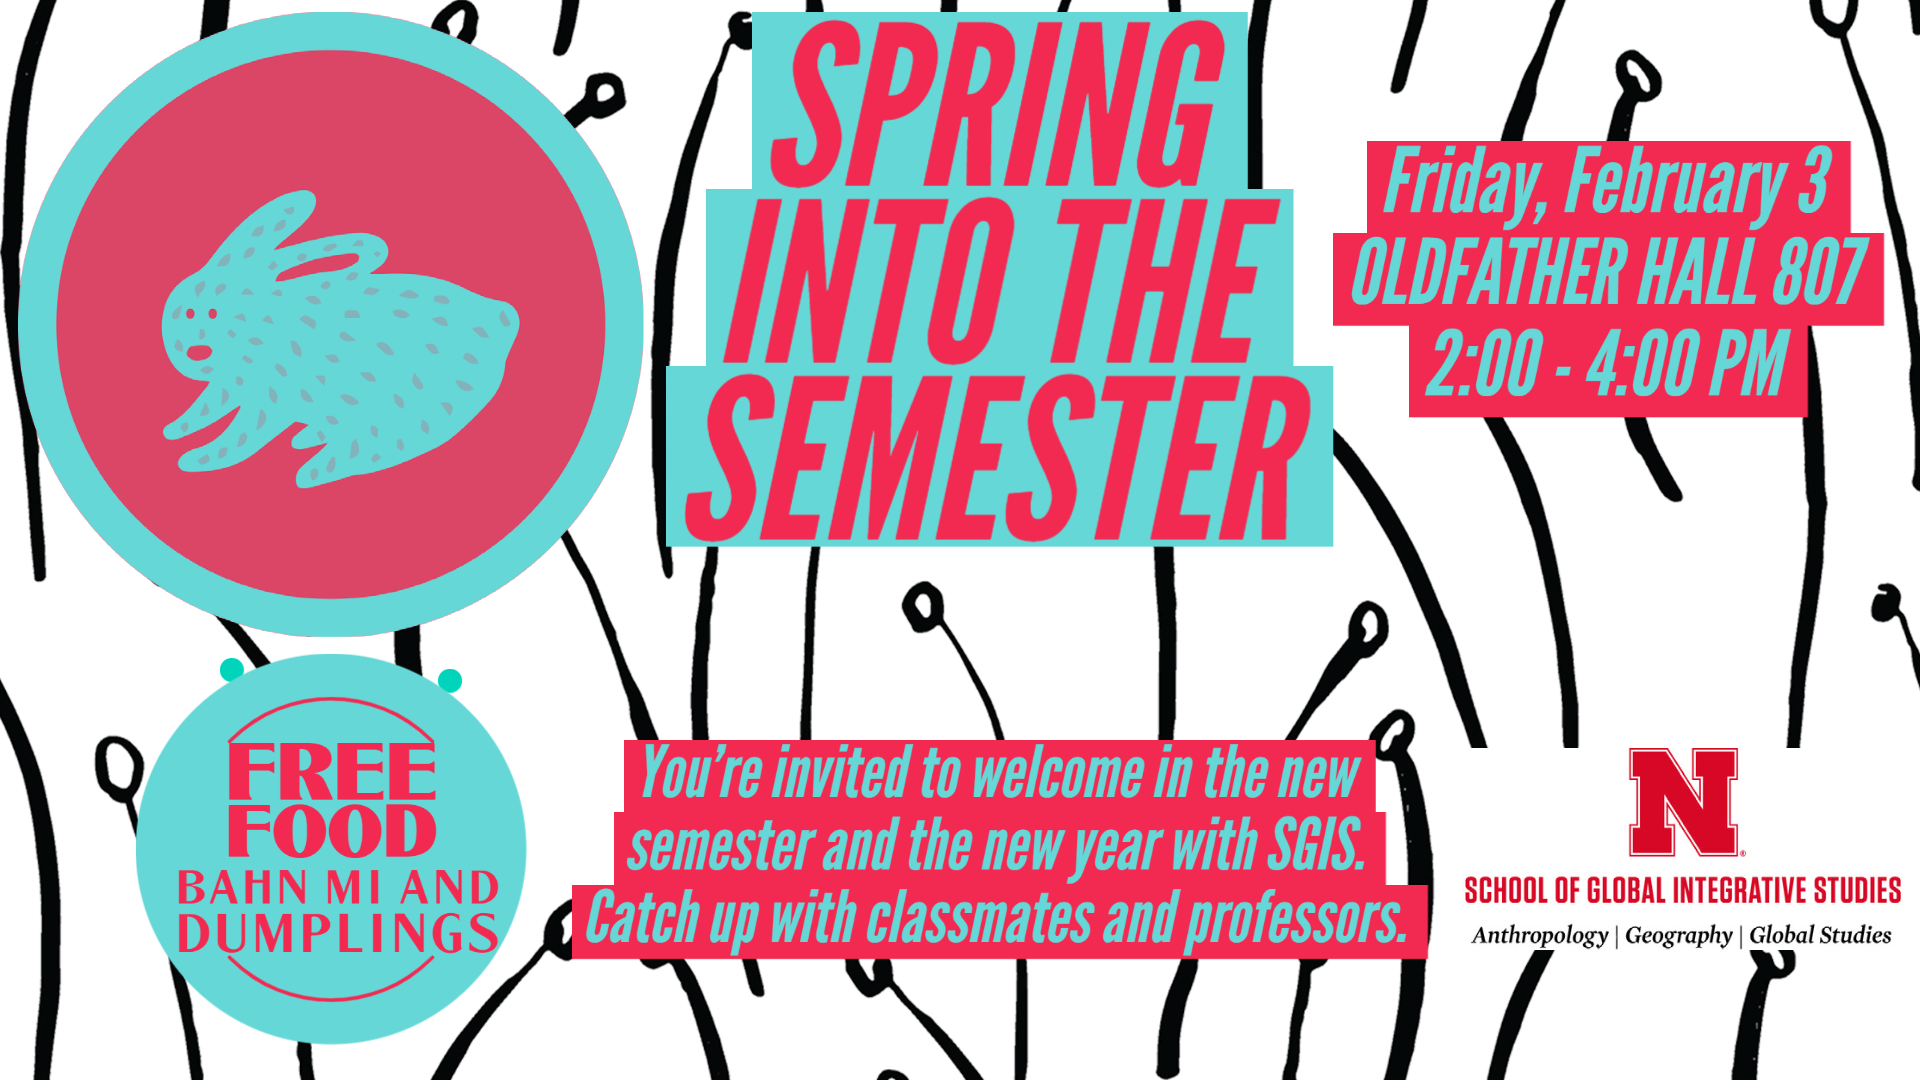 Spring Into the Semester Welcome Back Event